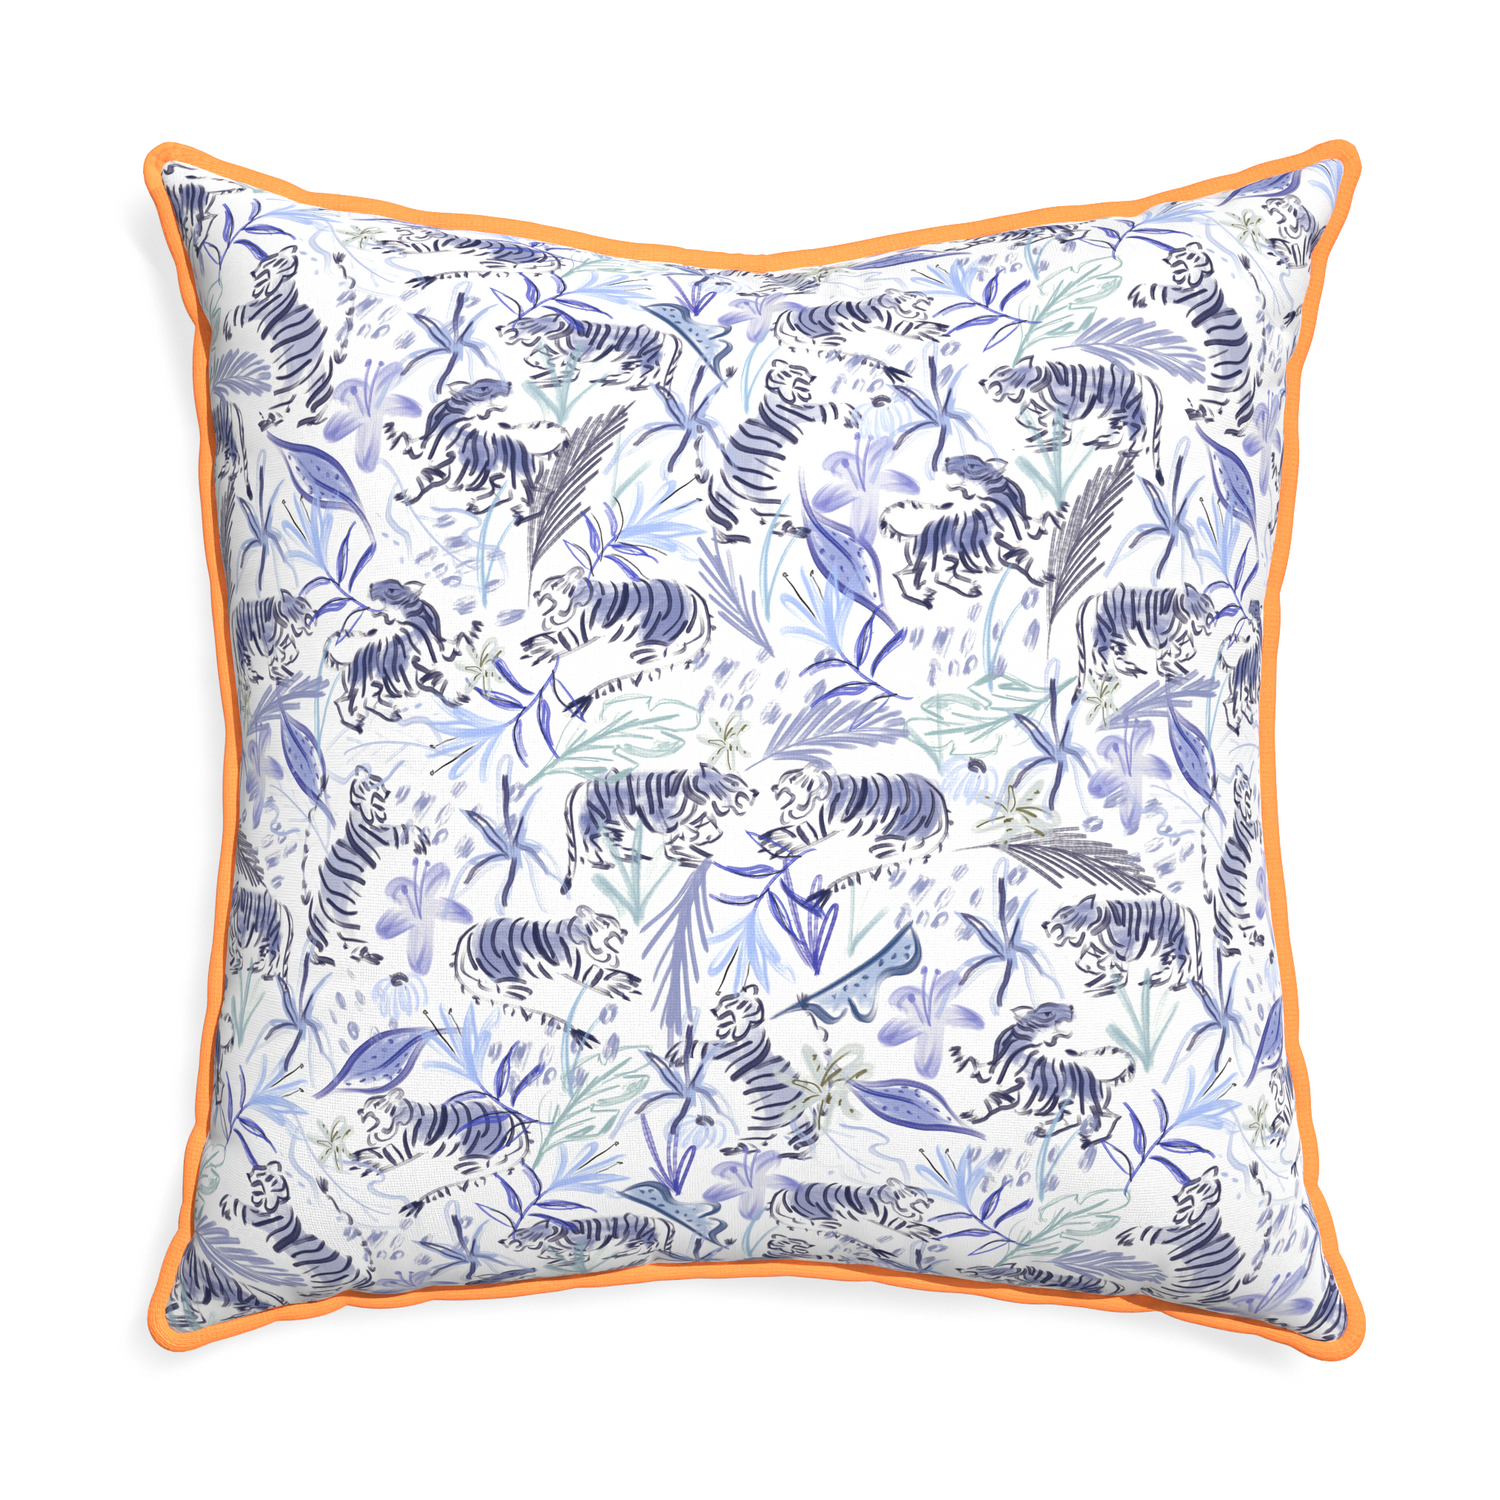 Euro-sham frida blue custom blue with intricate tiger designpillow with clementine piping on white background